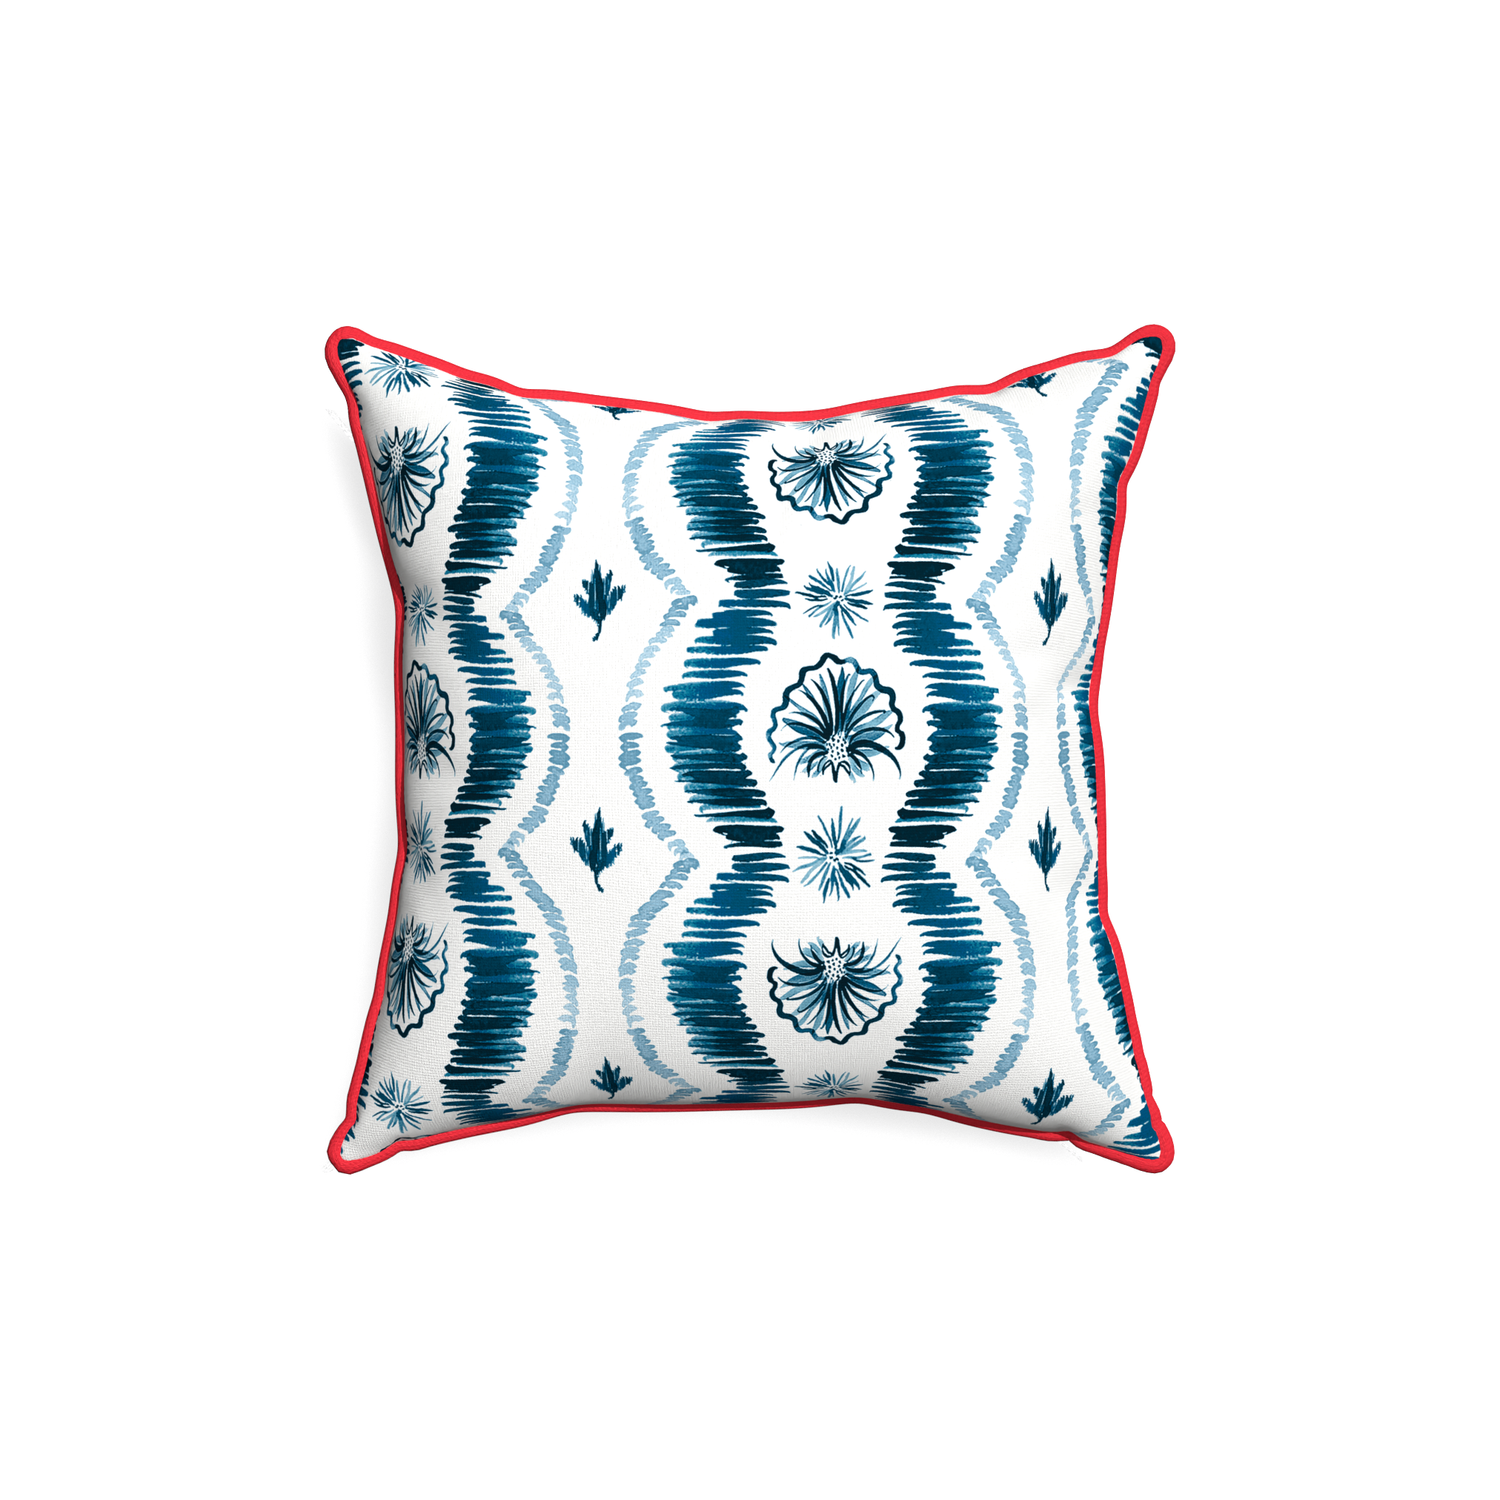 18-square alice custom blue ikatpillow with cherry piping on white background